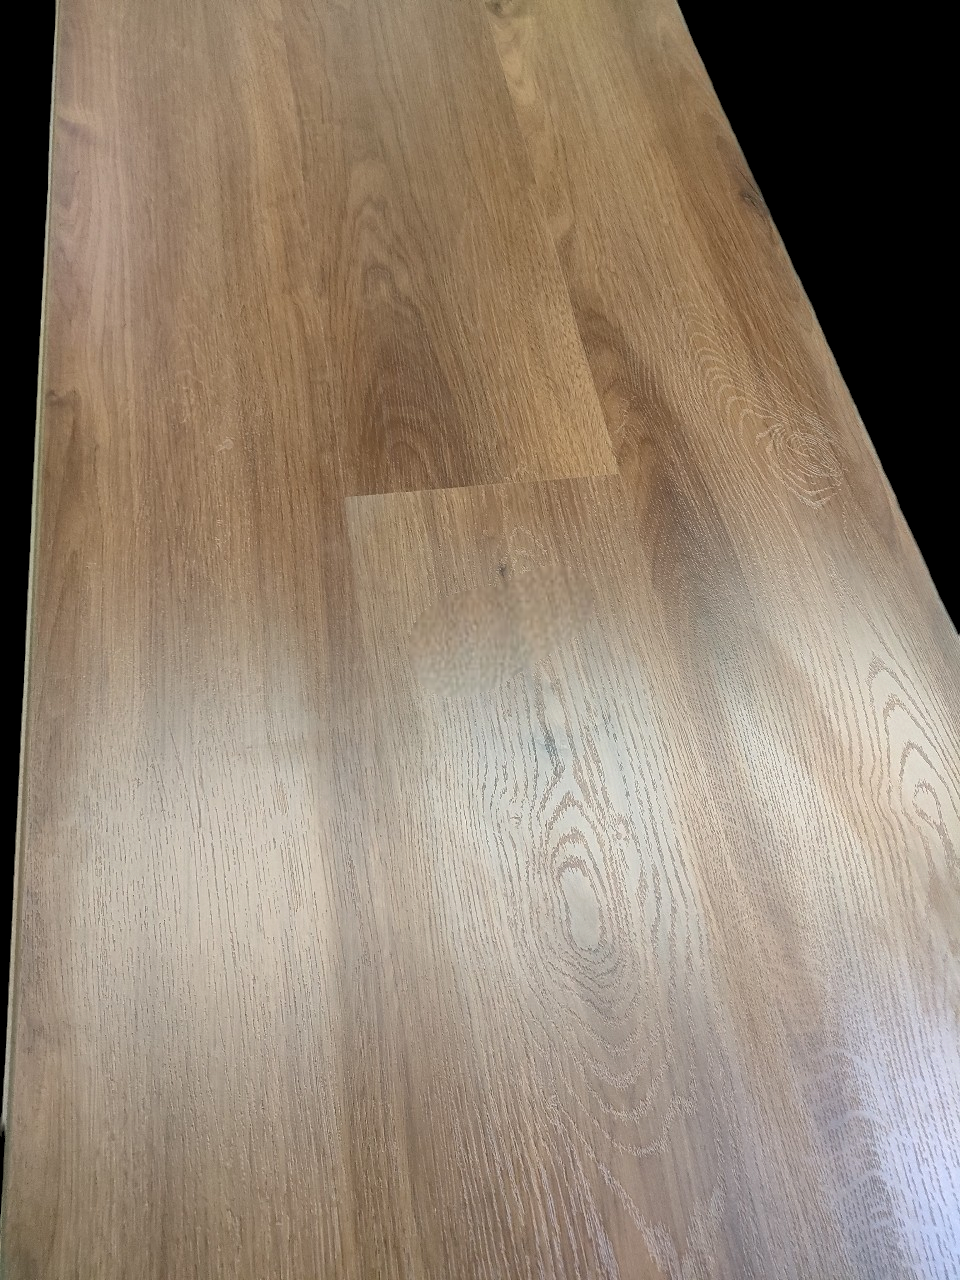 Toasted Pecan 1216mm x 196mm x 12mm (EHS S605)